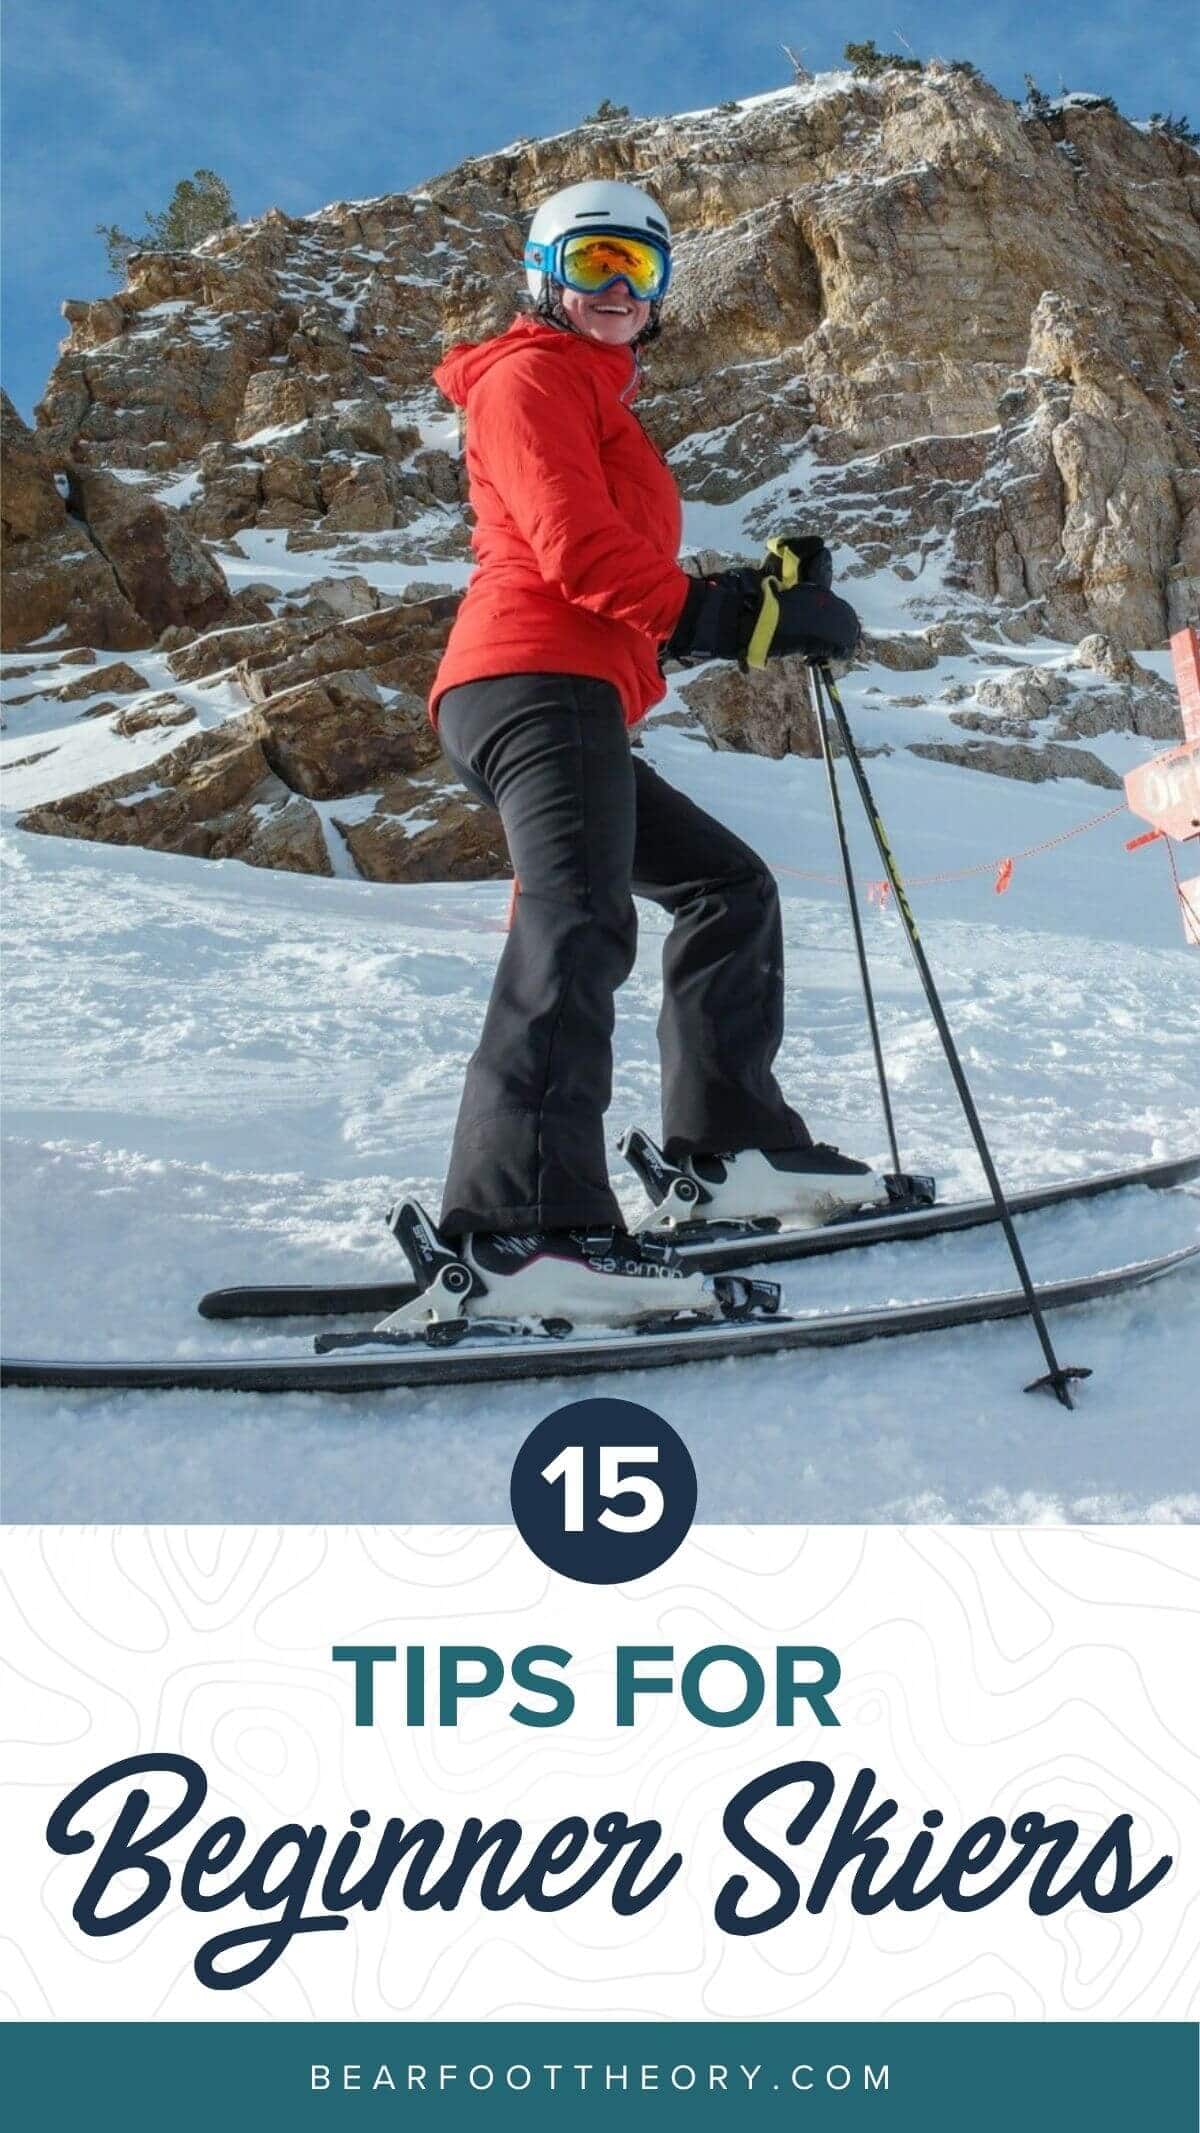 Learn how to ski this winter with these beginner skier tips for adults. Find advice on gear, technique, form, lessons & more!